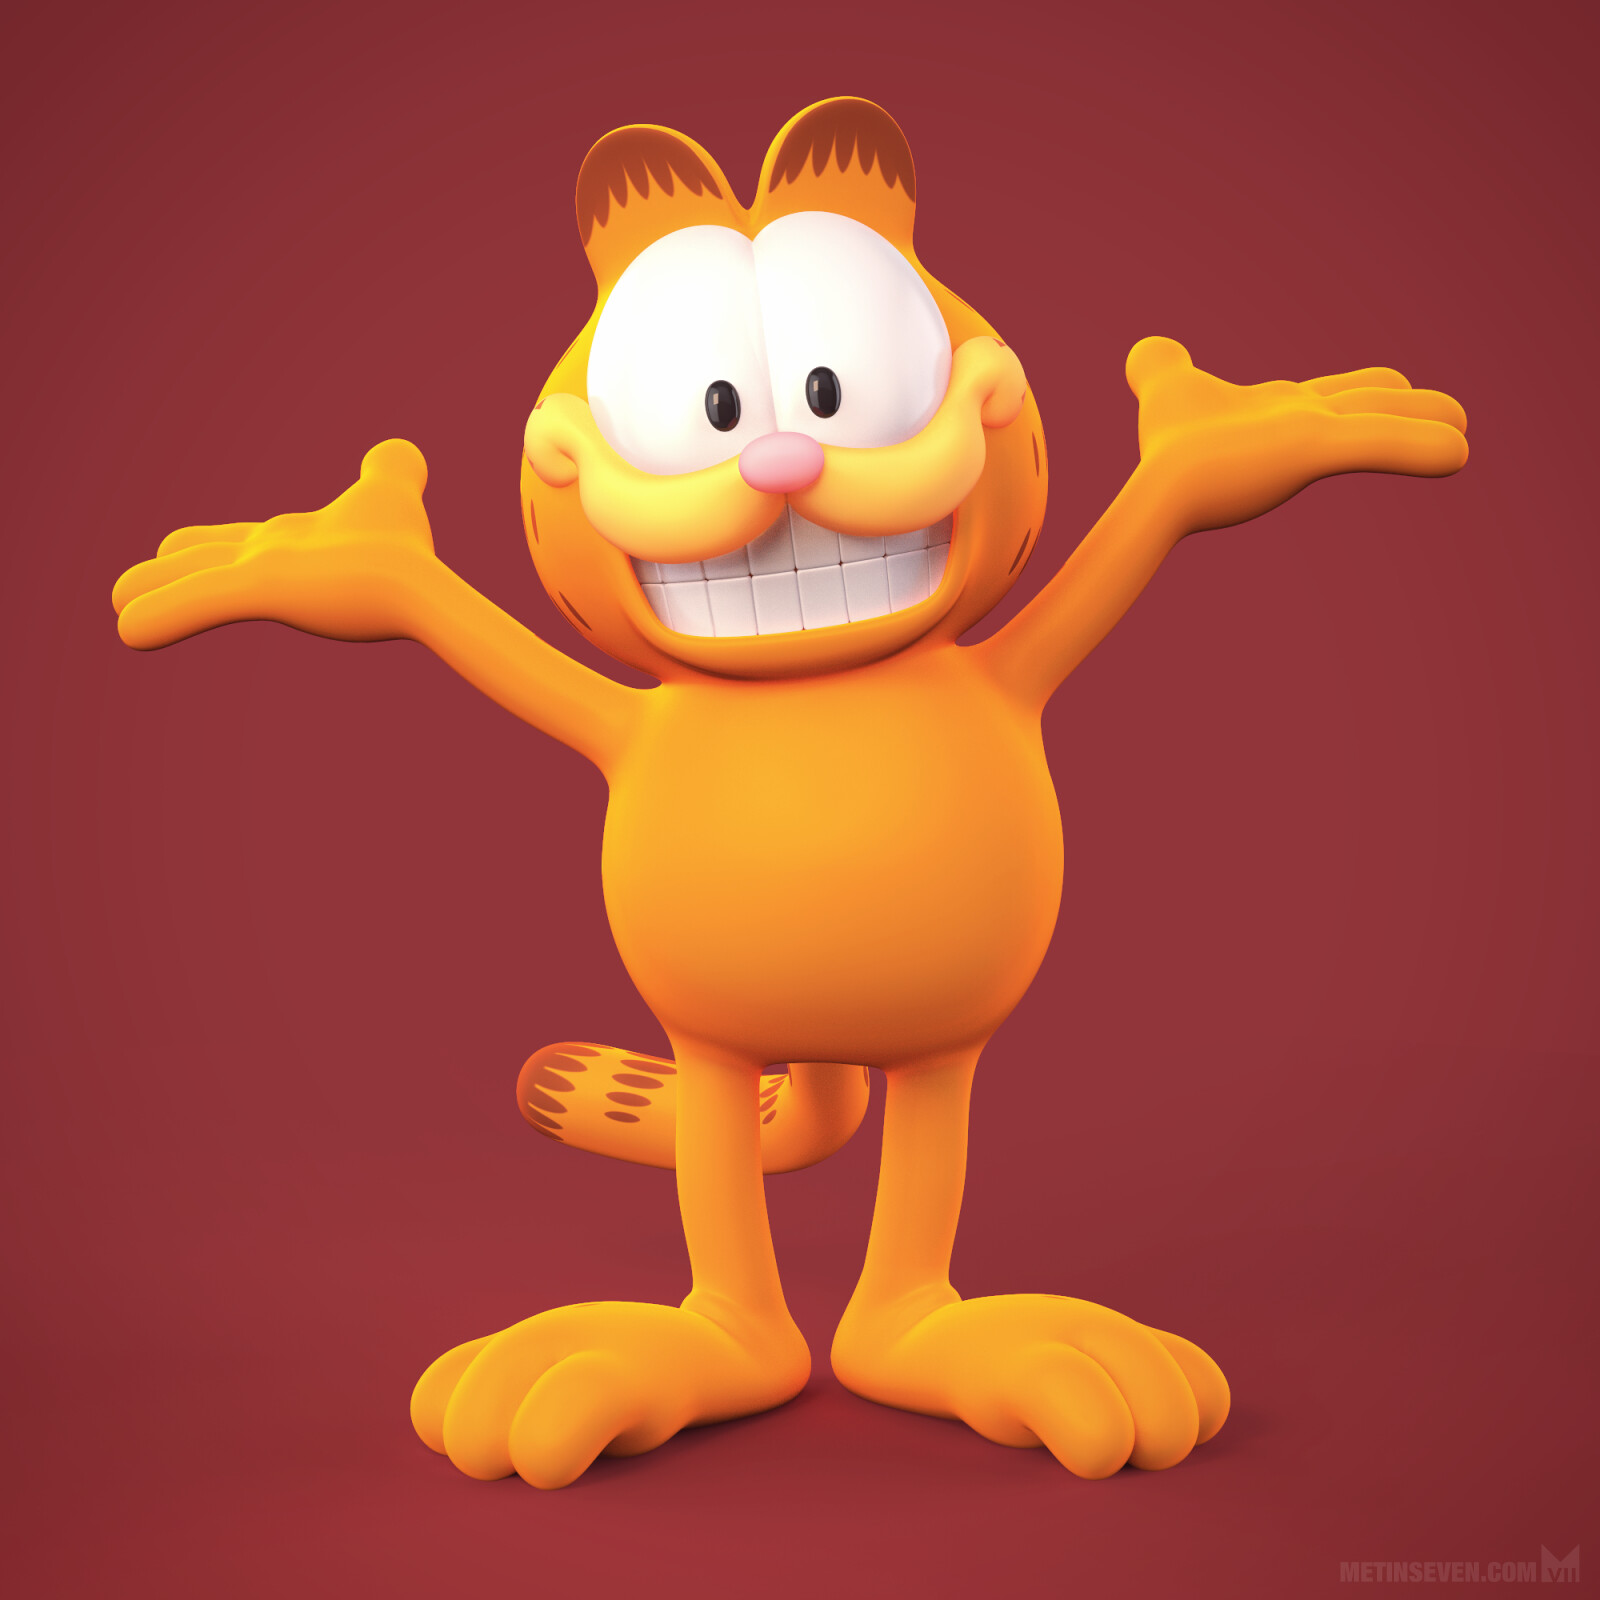 3D model of the Garfield comic character for a licensed VR application